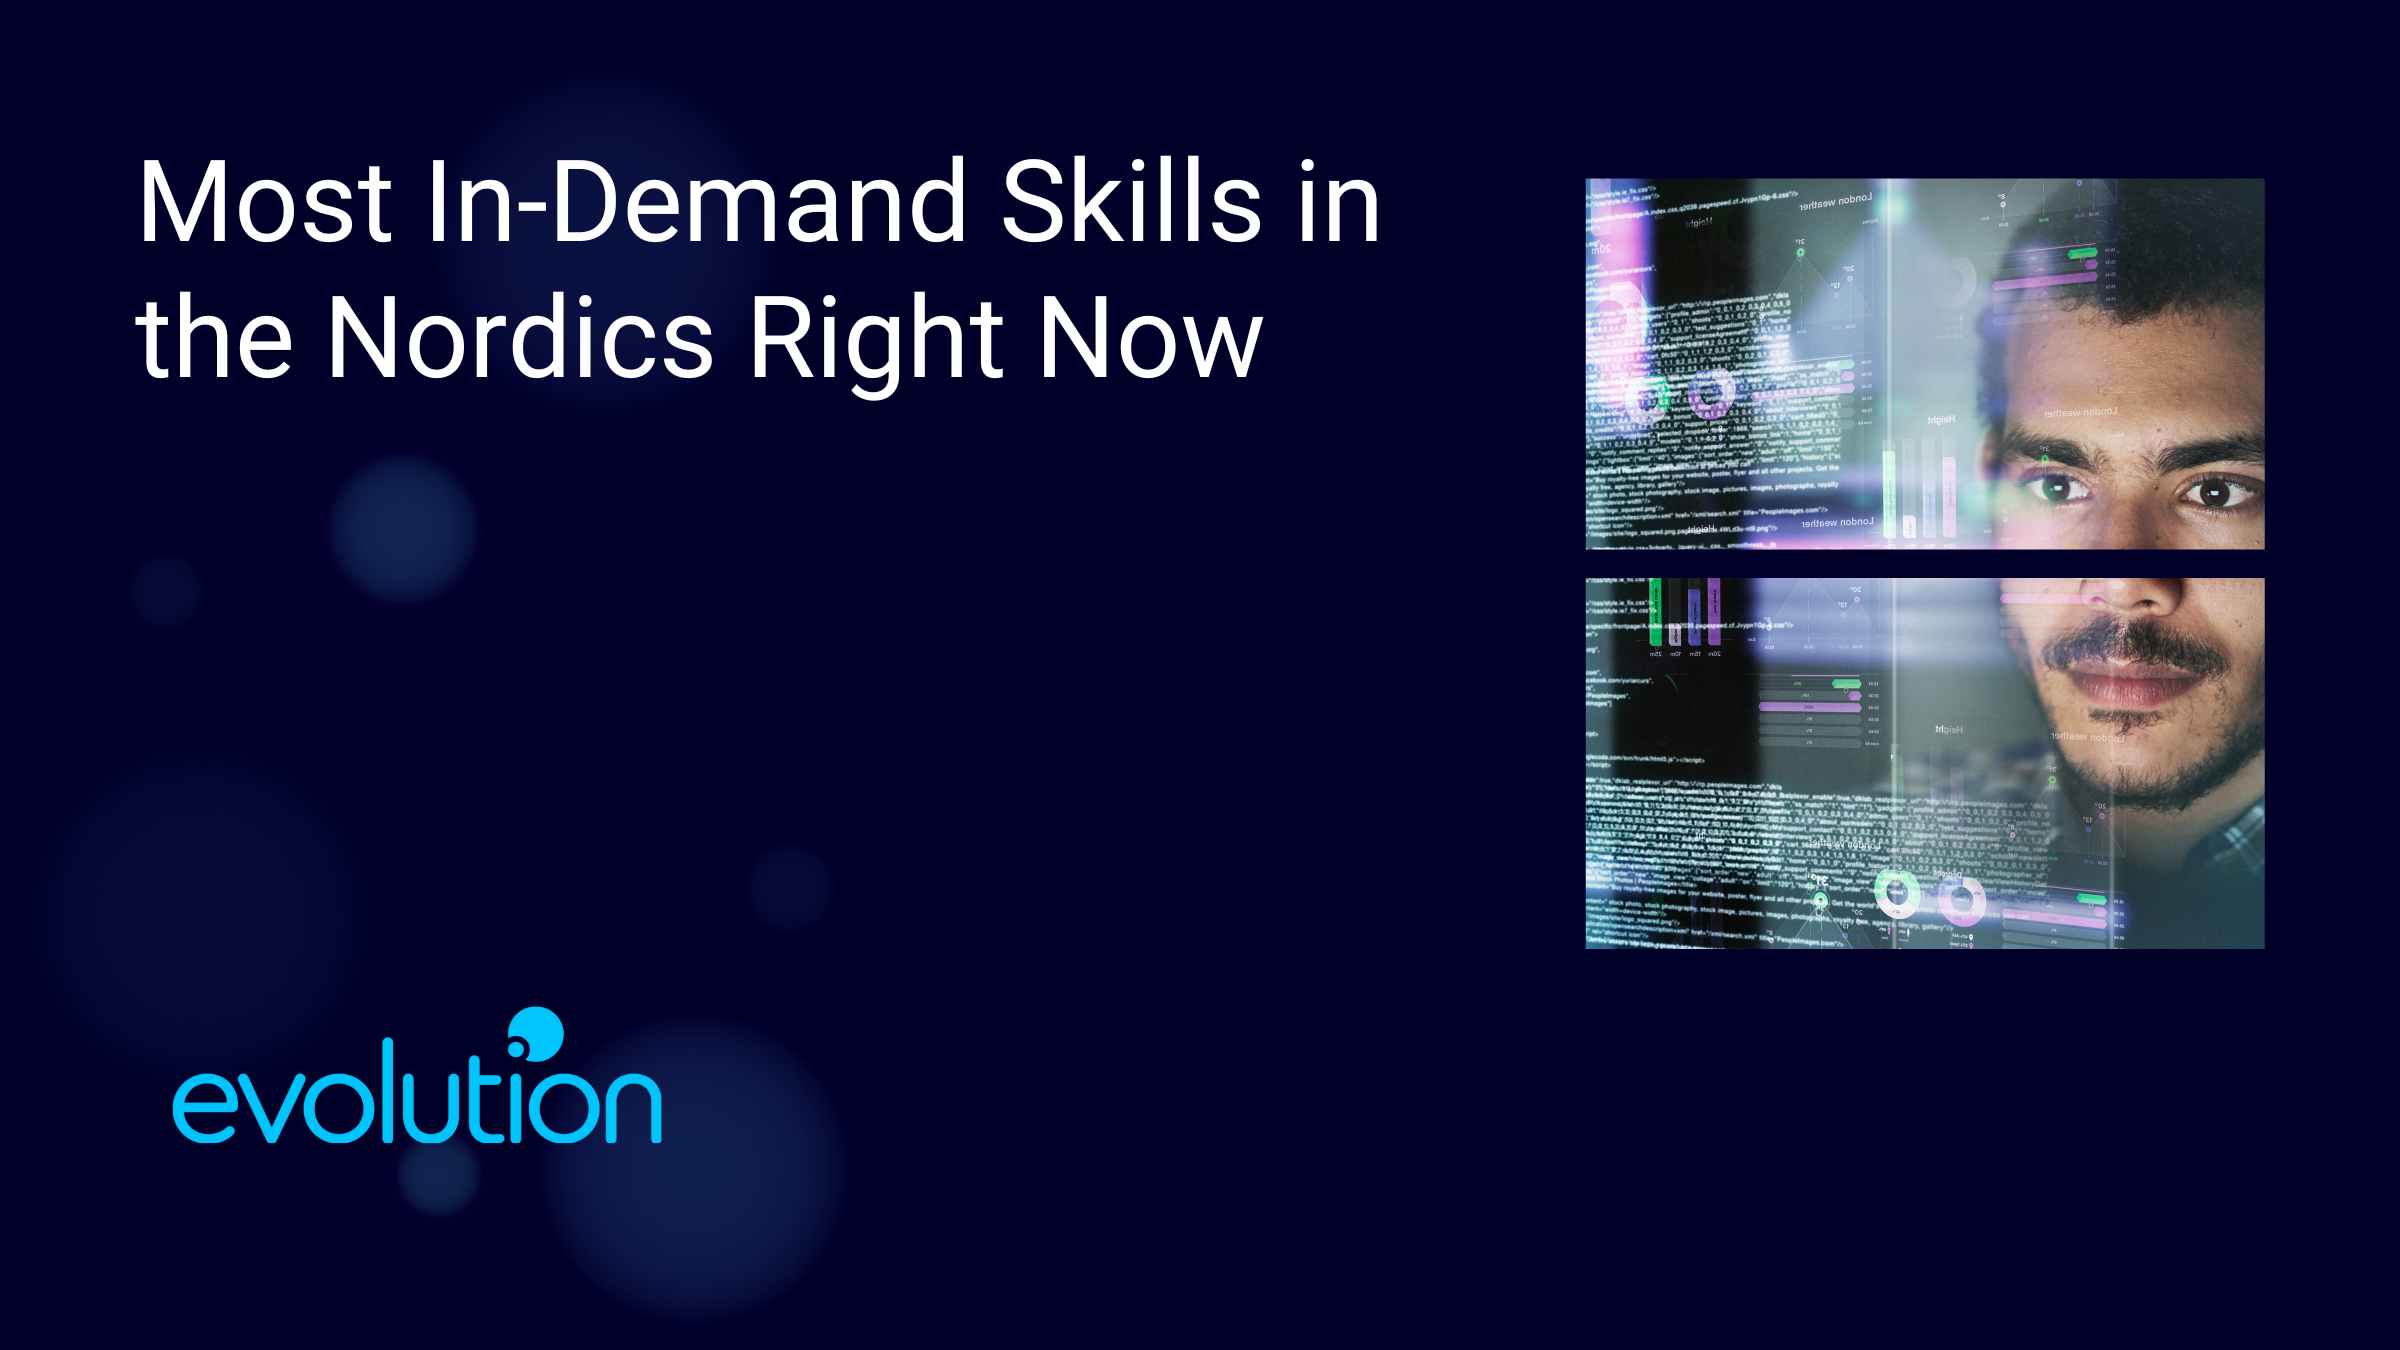 Most In-Demand Skills in the Nordics Right Now